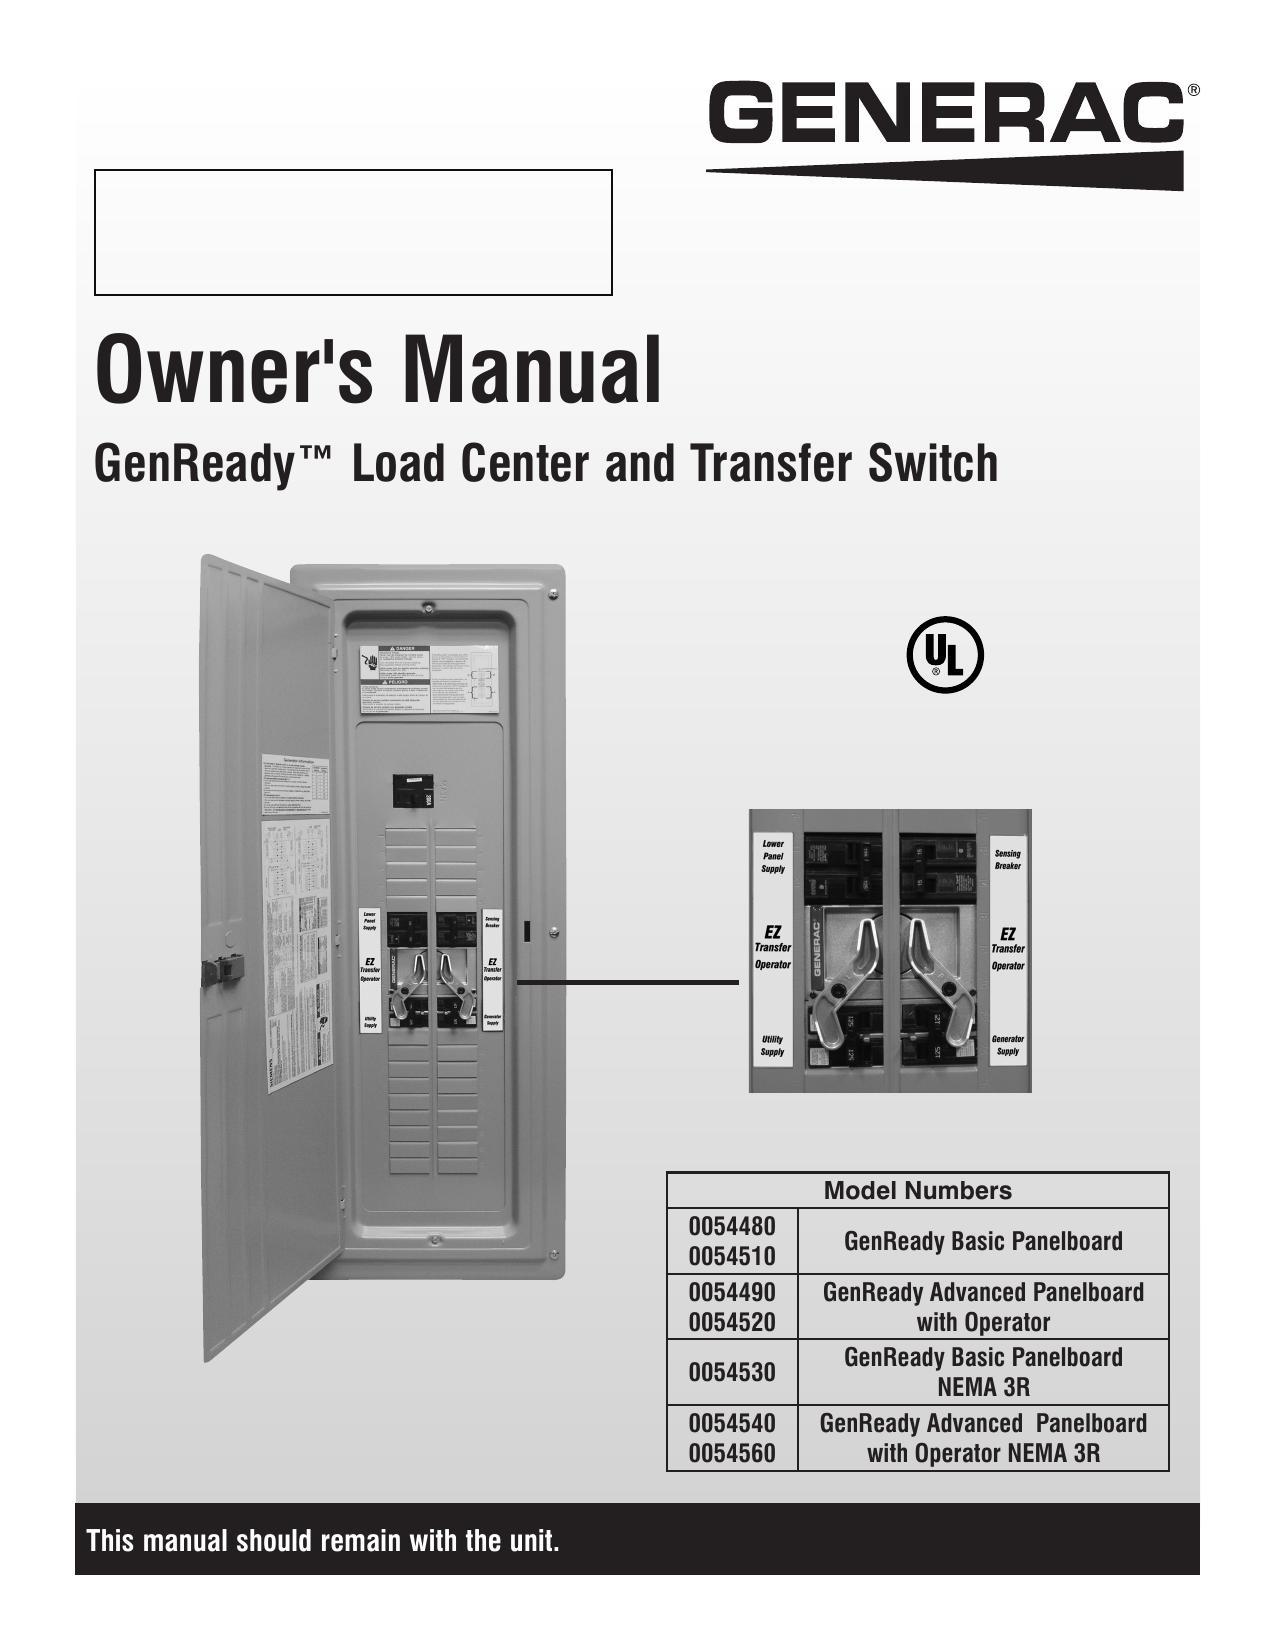 owners-manual-genready-tm-load-center-and-transfer-switch.pdf